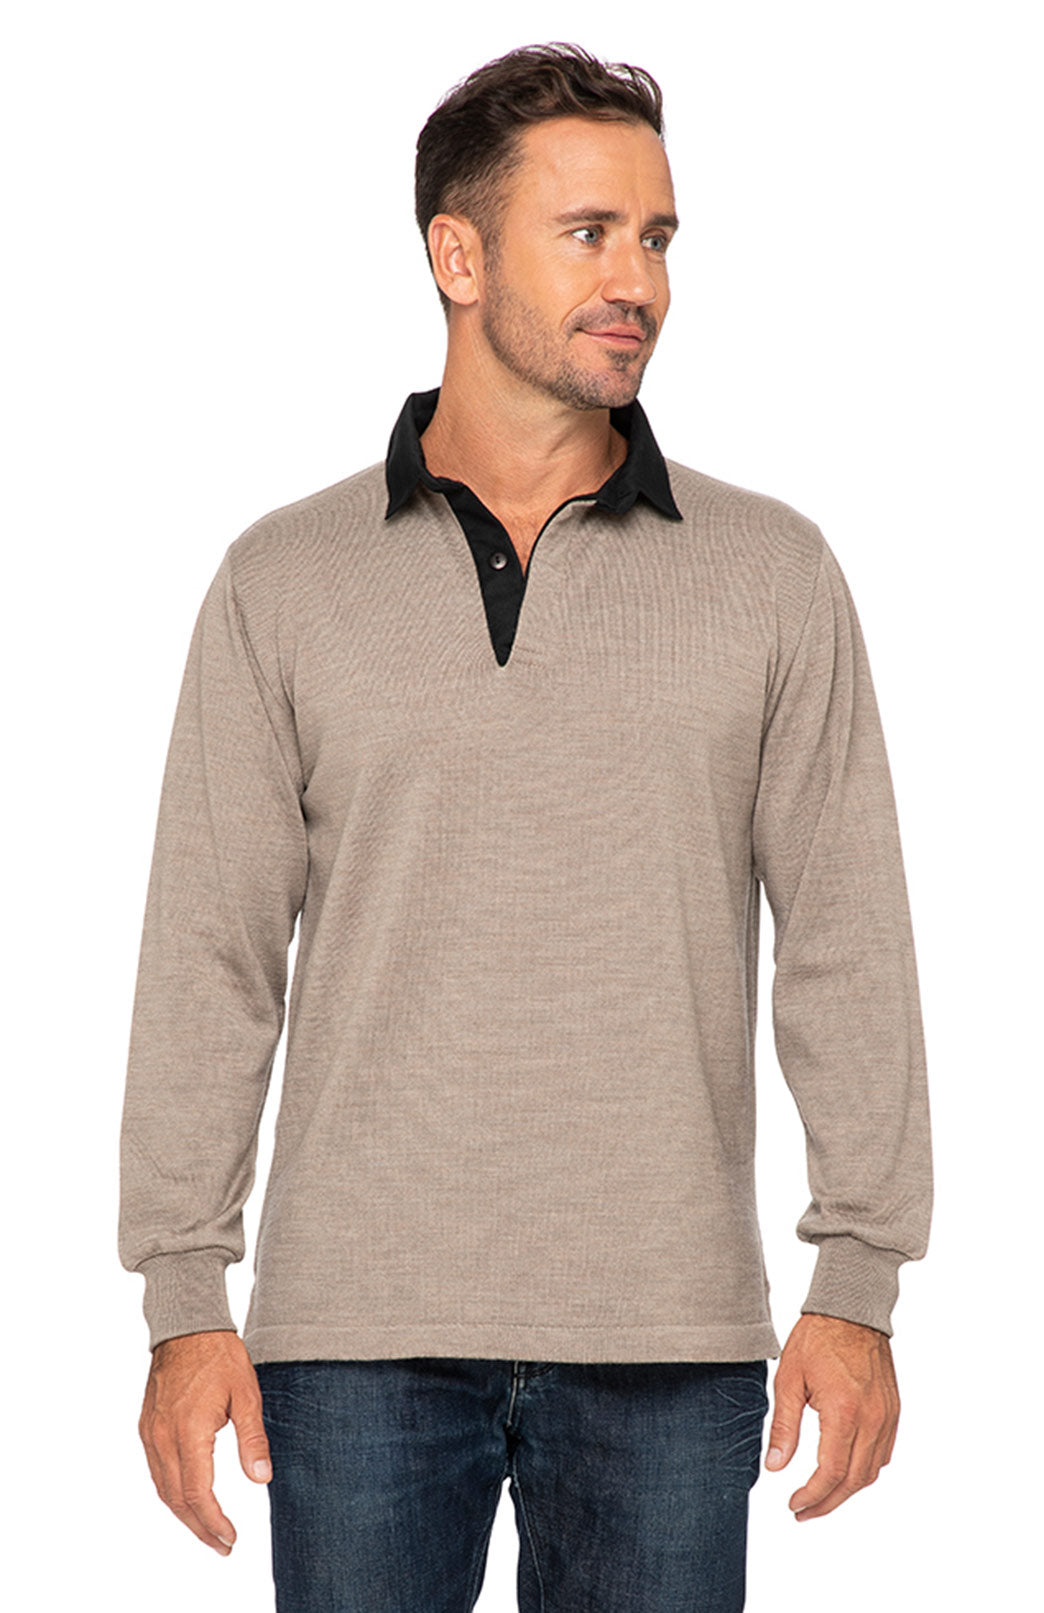 Fawn Unisex Classic Merino Wool Rugby Top
